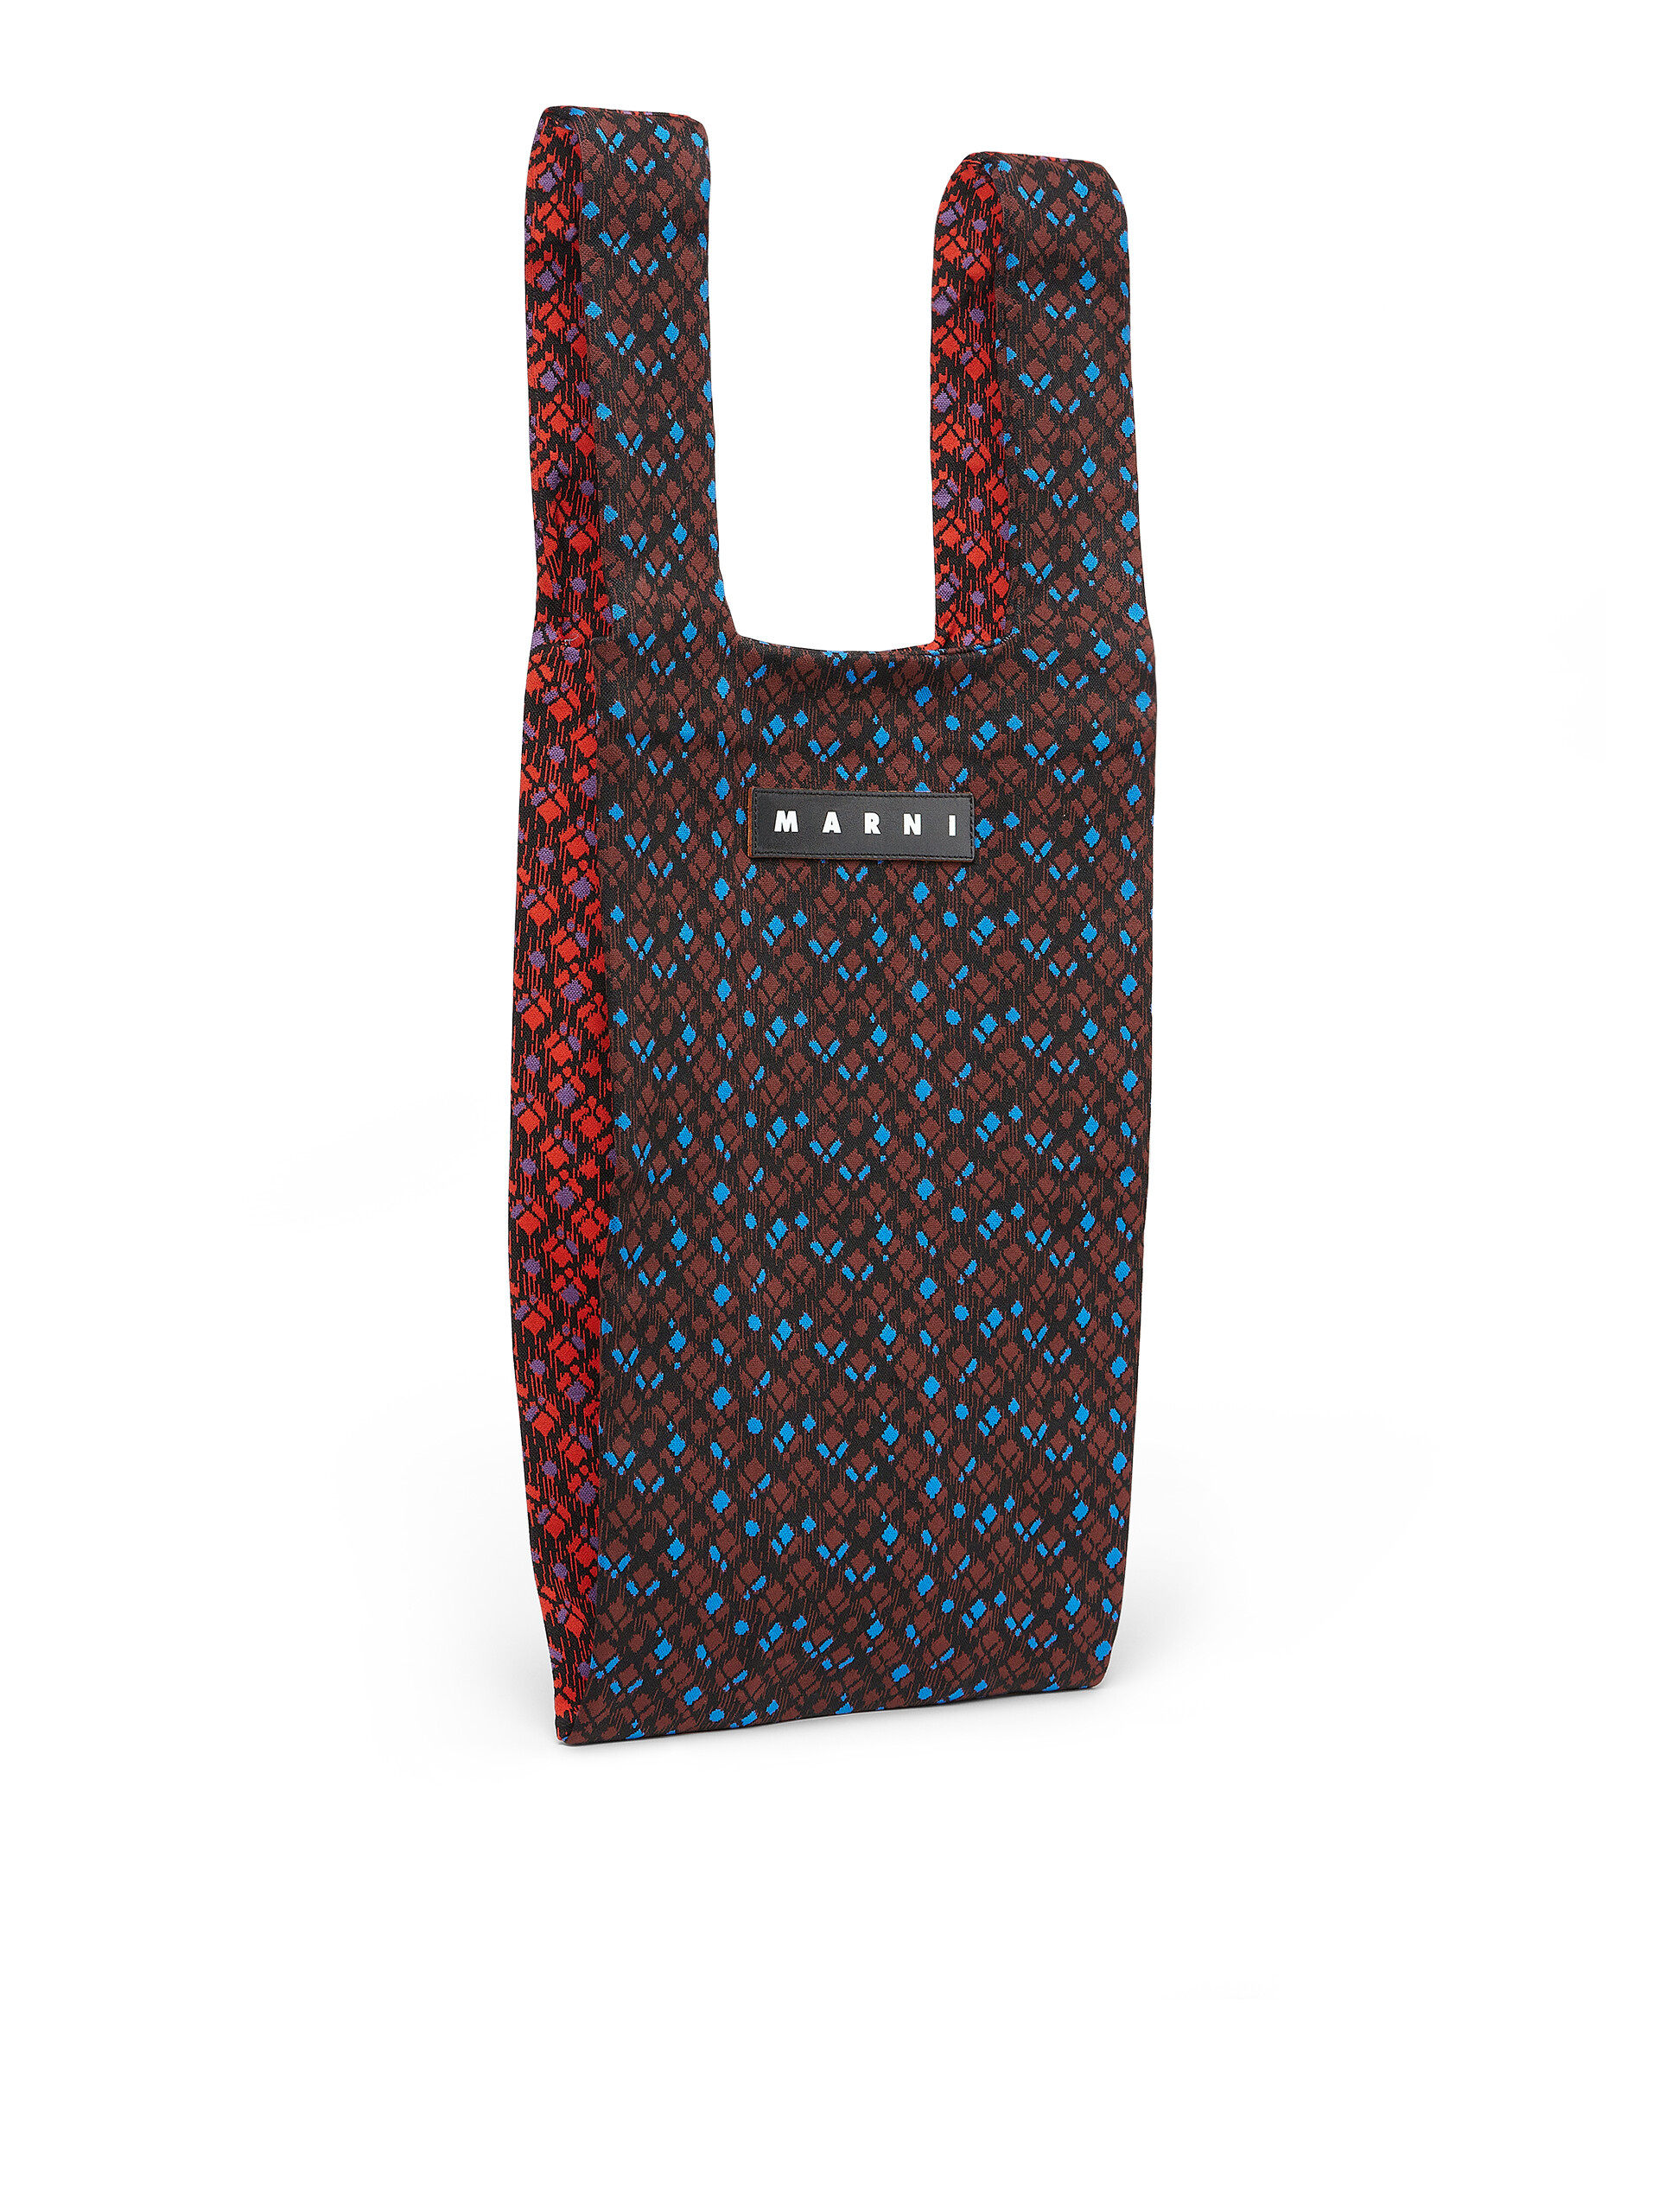 MARNI MARKET shopping bag with multicoloured print - Shopping Bags - Image 2